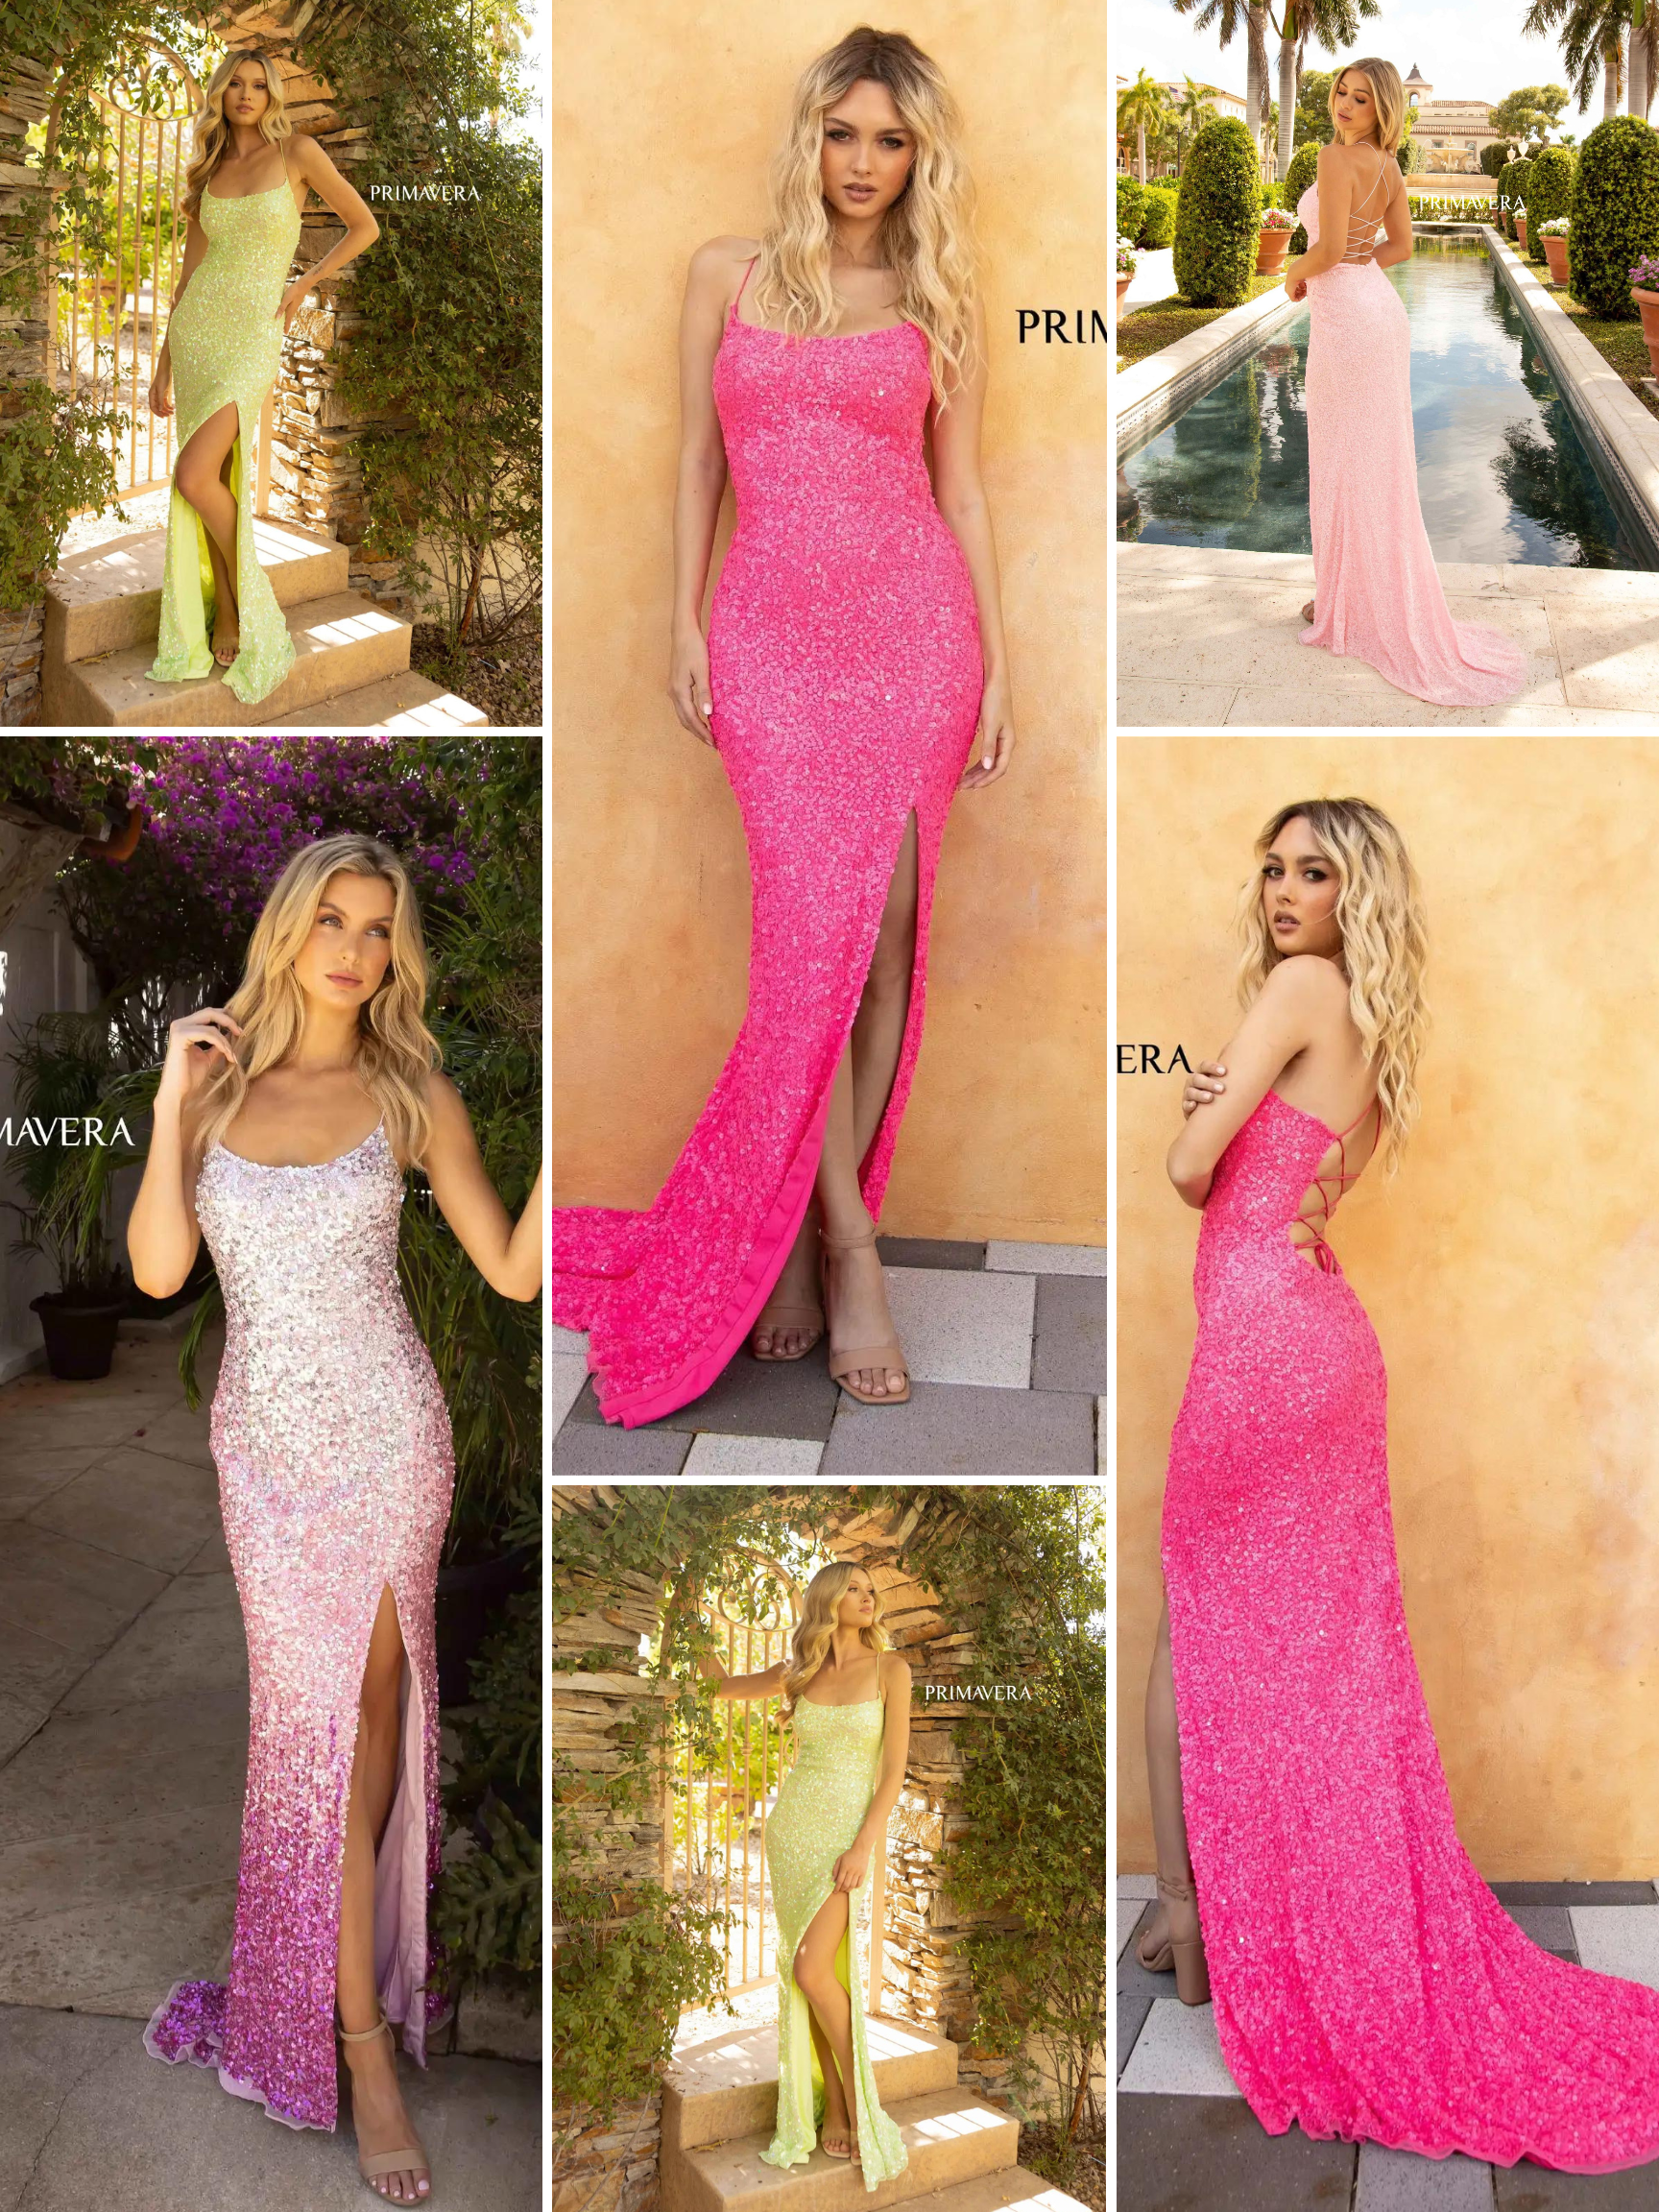 Prom Gowns Bedford & Sackville, Blush Prom